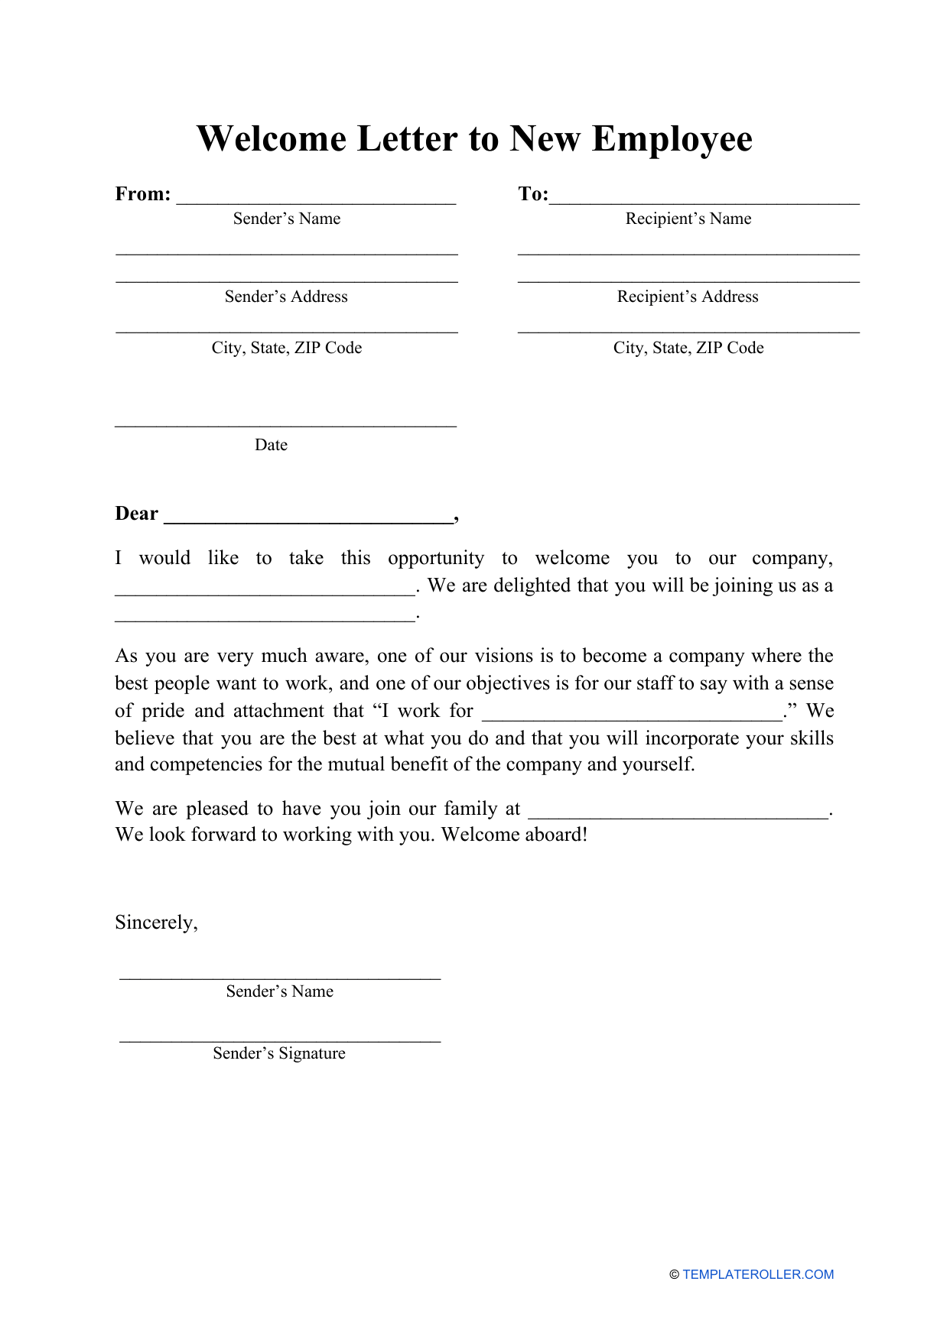 Letter to New Employee Template Fill Out, Sign Online and